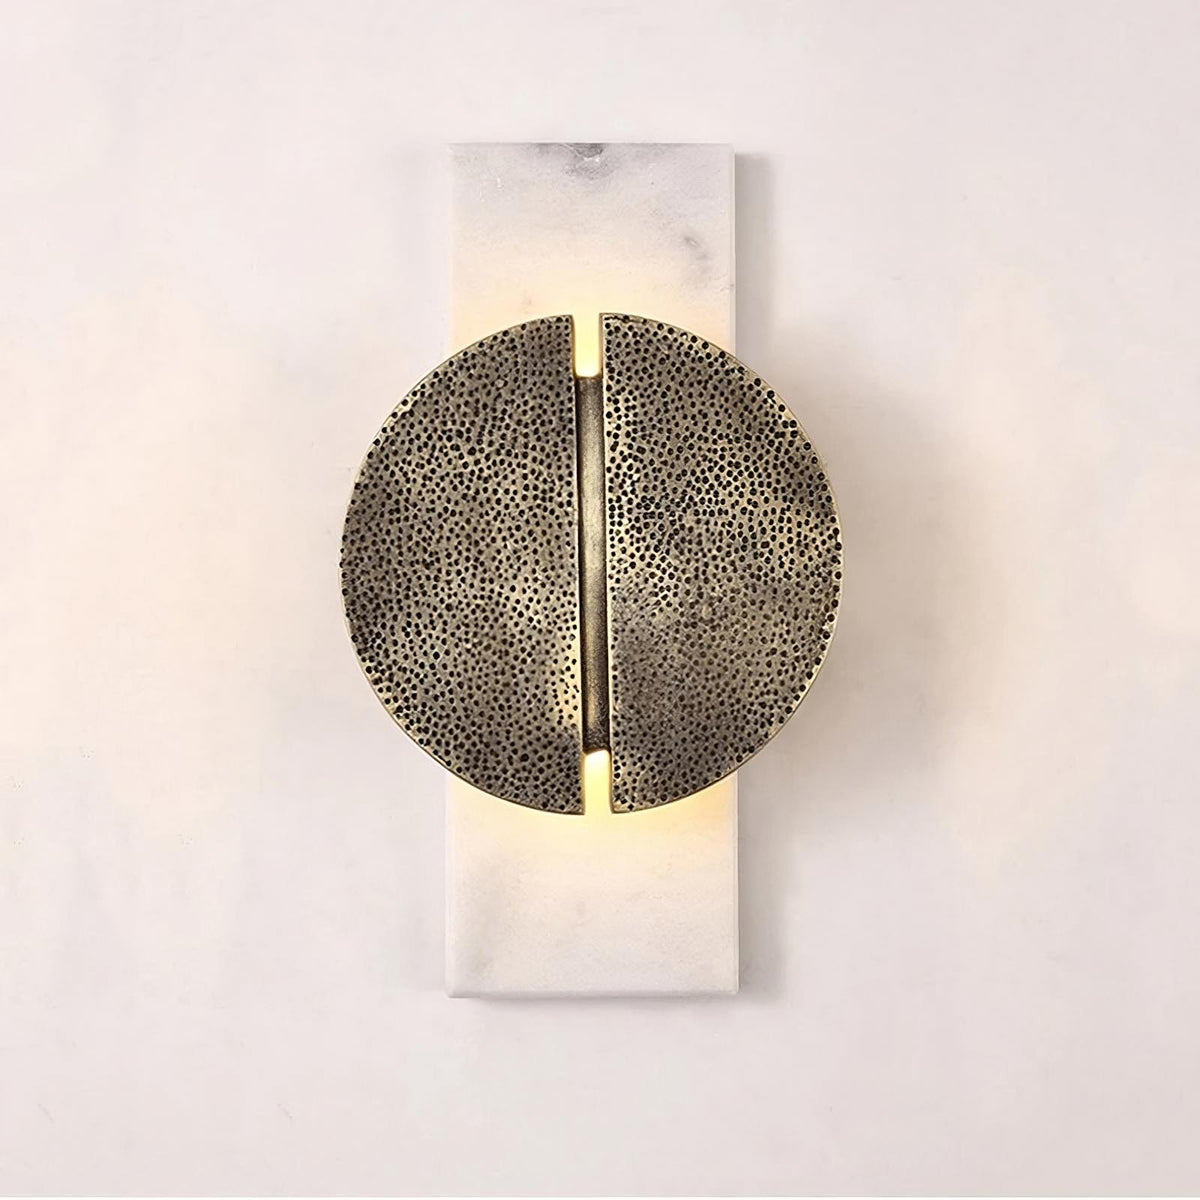 A modern wall sconce with a circular, textured metal design, split symmetrically down the middle. The light emits softly from behind, mounted on a rectangular base against a plain, light-colored wall. The Medieval Marble Wall Light Sconce by Bigman adds an elegant touch to any space.